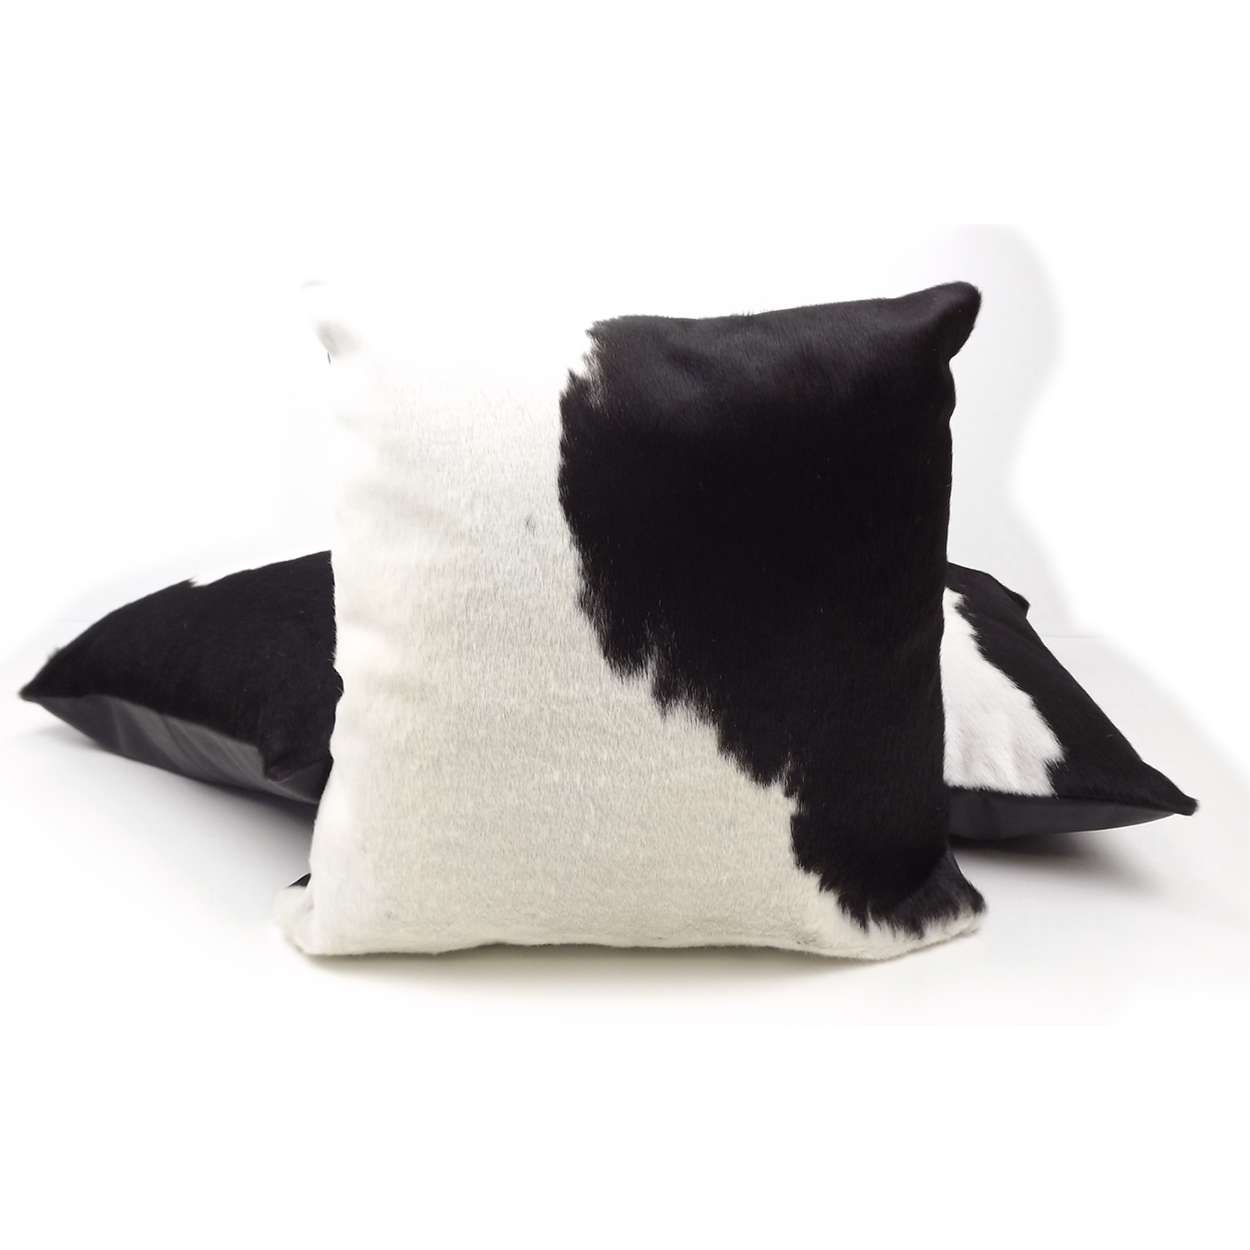 20in Overstuffed Cowhide Pillow - Black and White - Leather Back